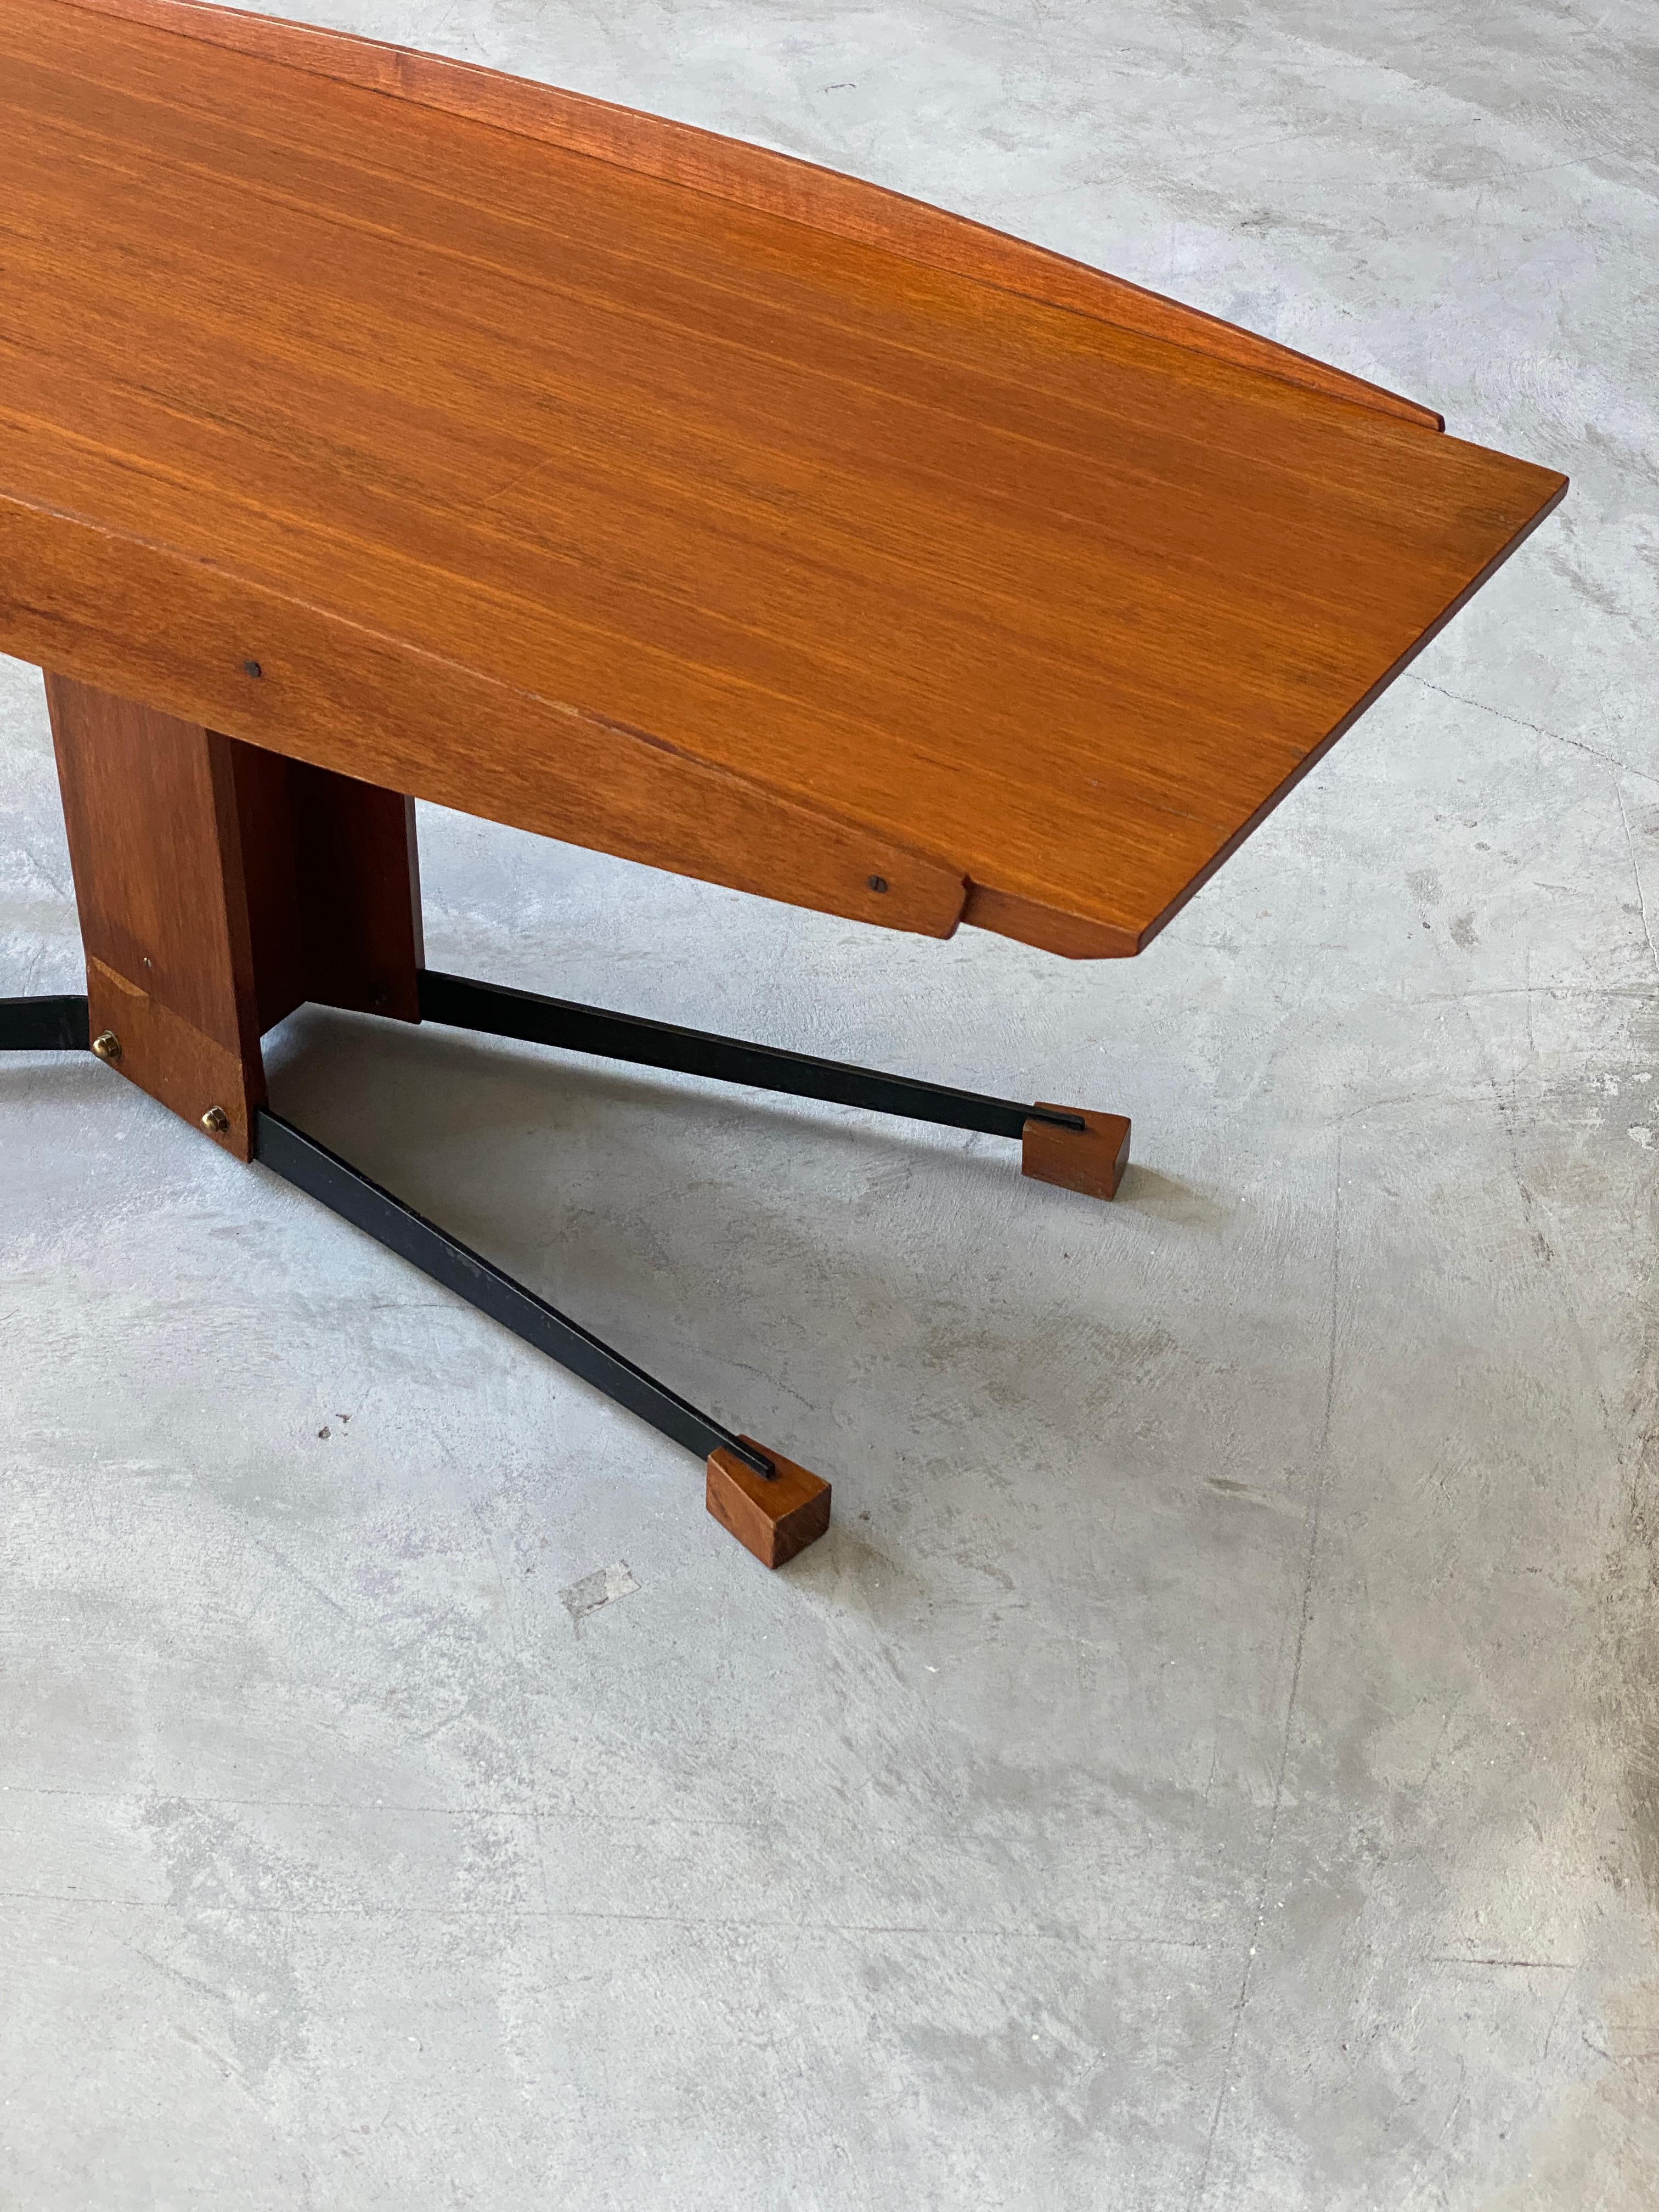 Mid-Century Modern Italian, Modernist Coffee Table, Teak, Lacquered Metal, Brass, Italy, 1950s For Sale